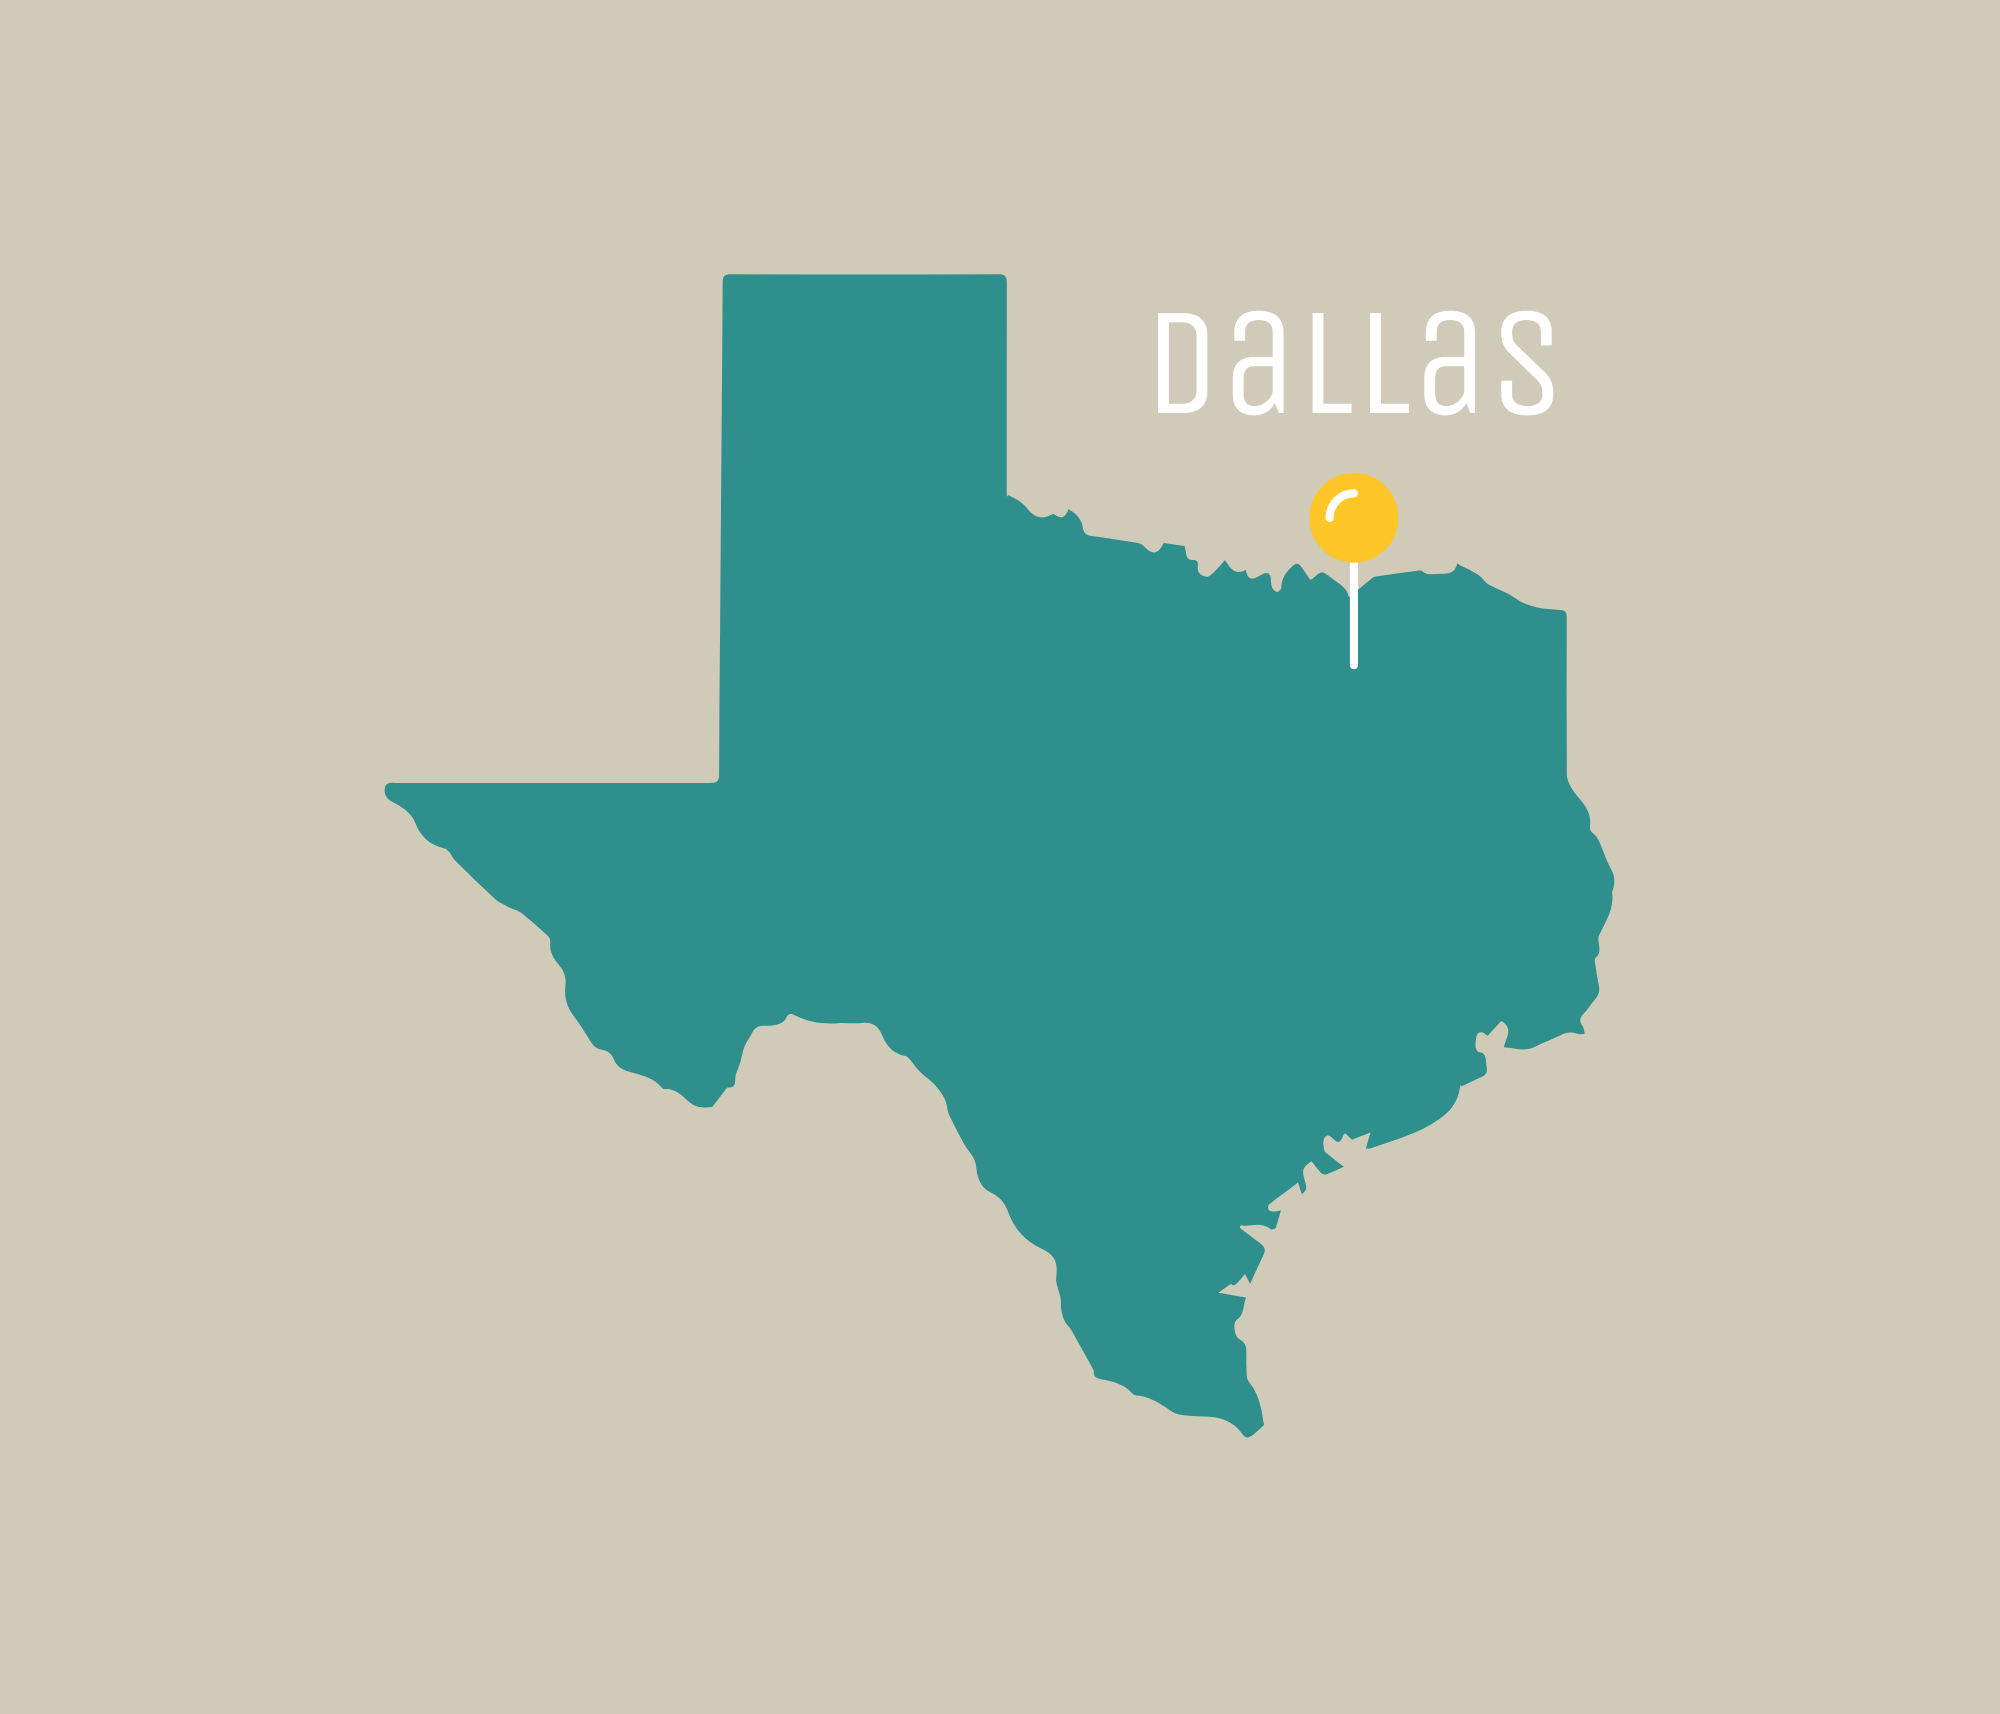 Yellow pin in the state of Texas where Dallas is